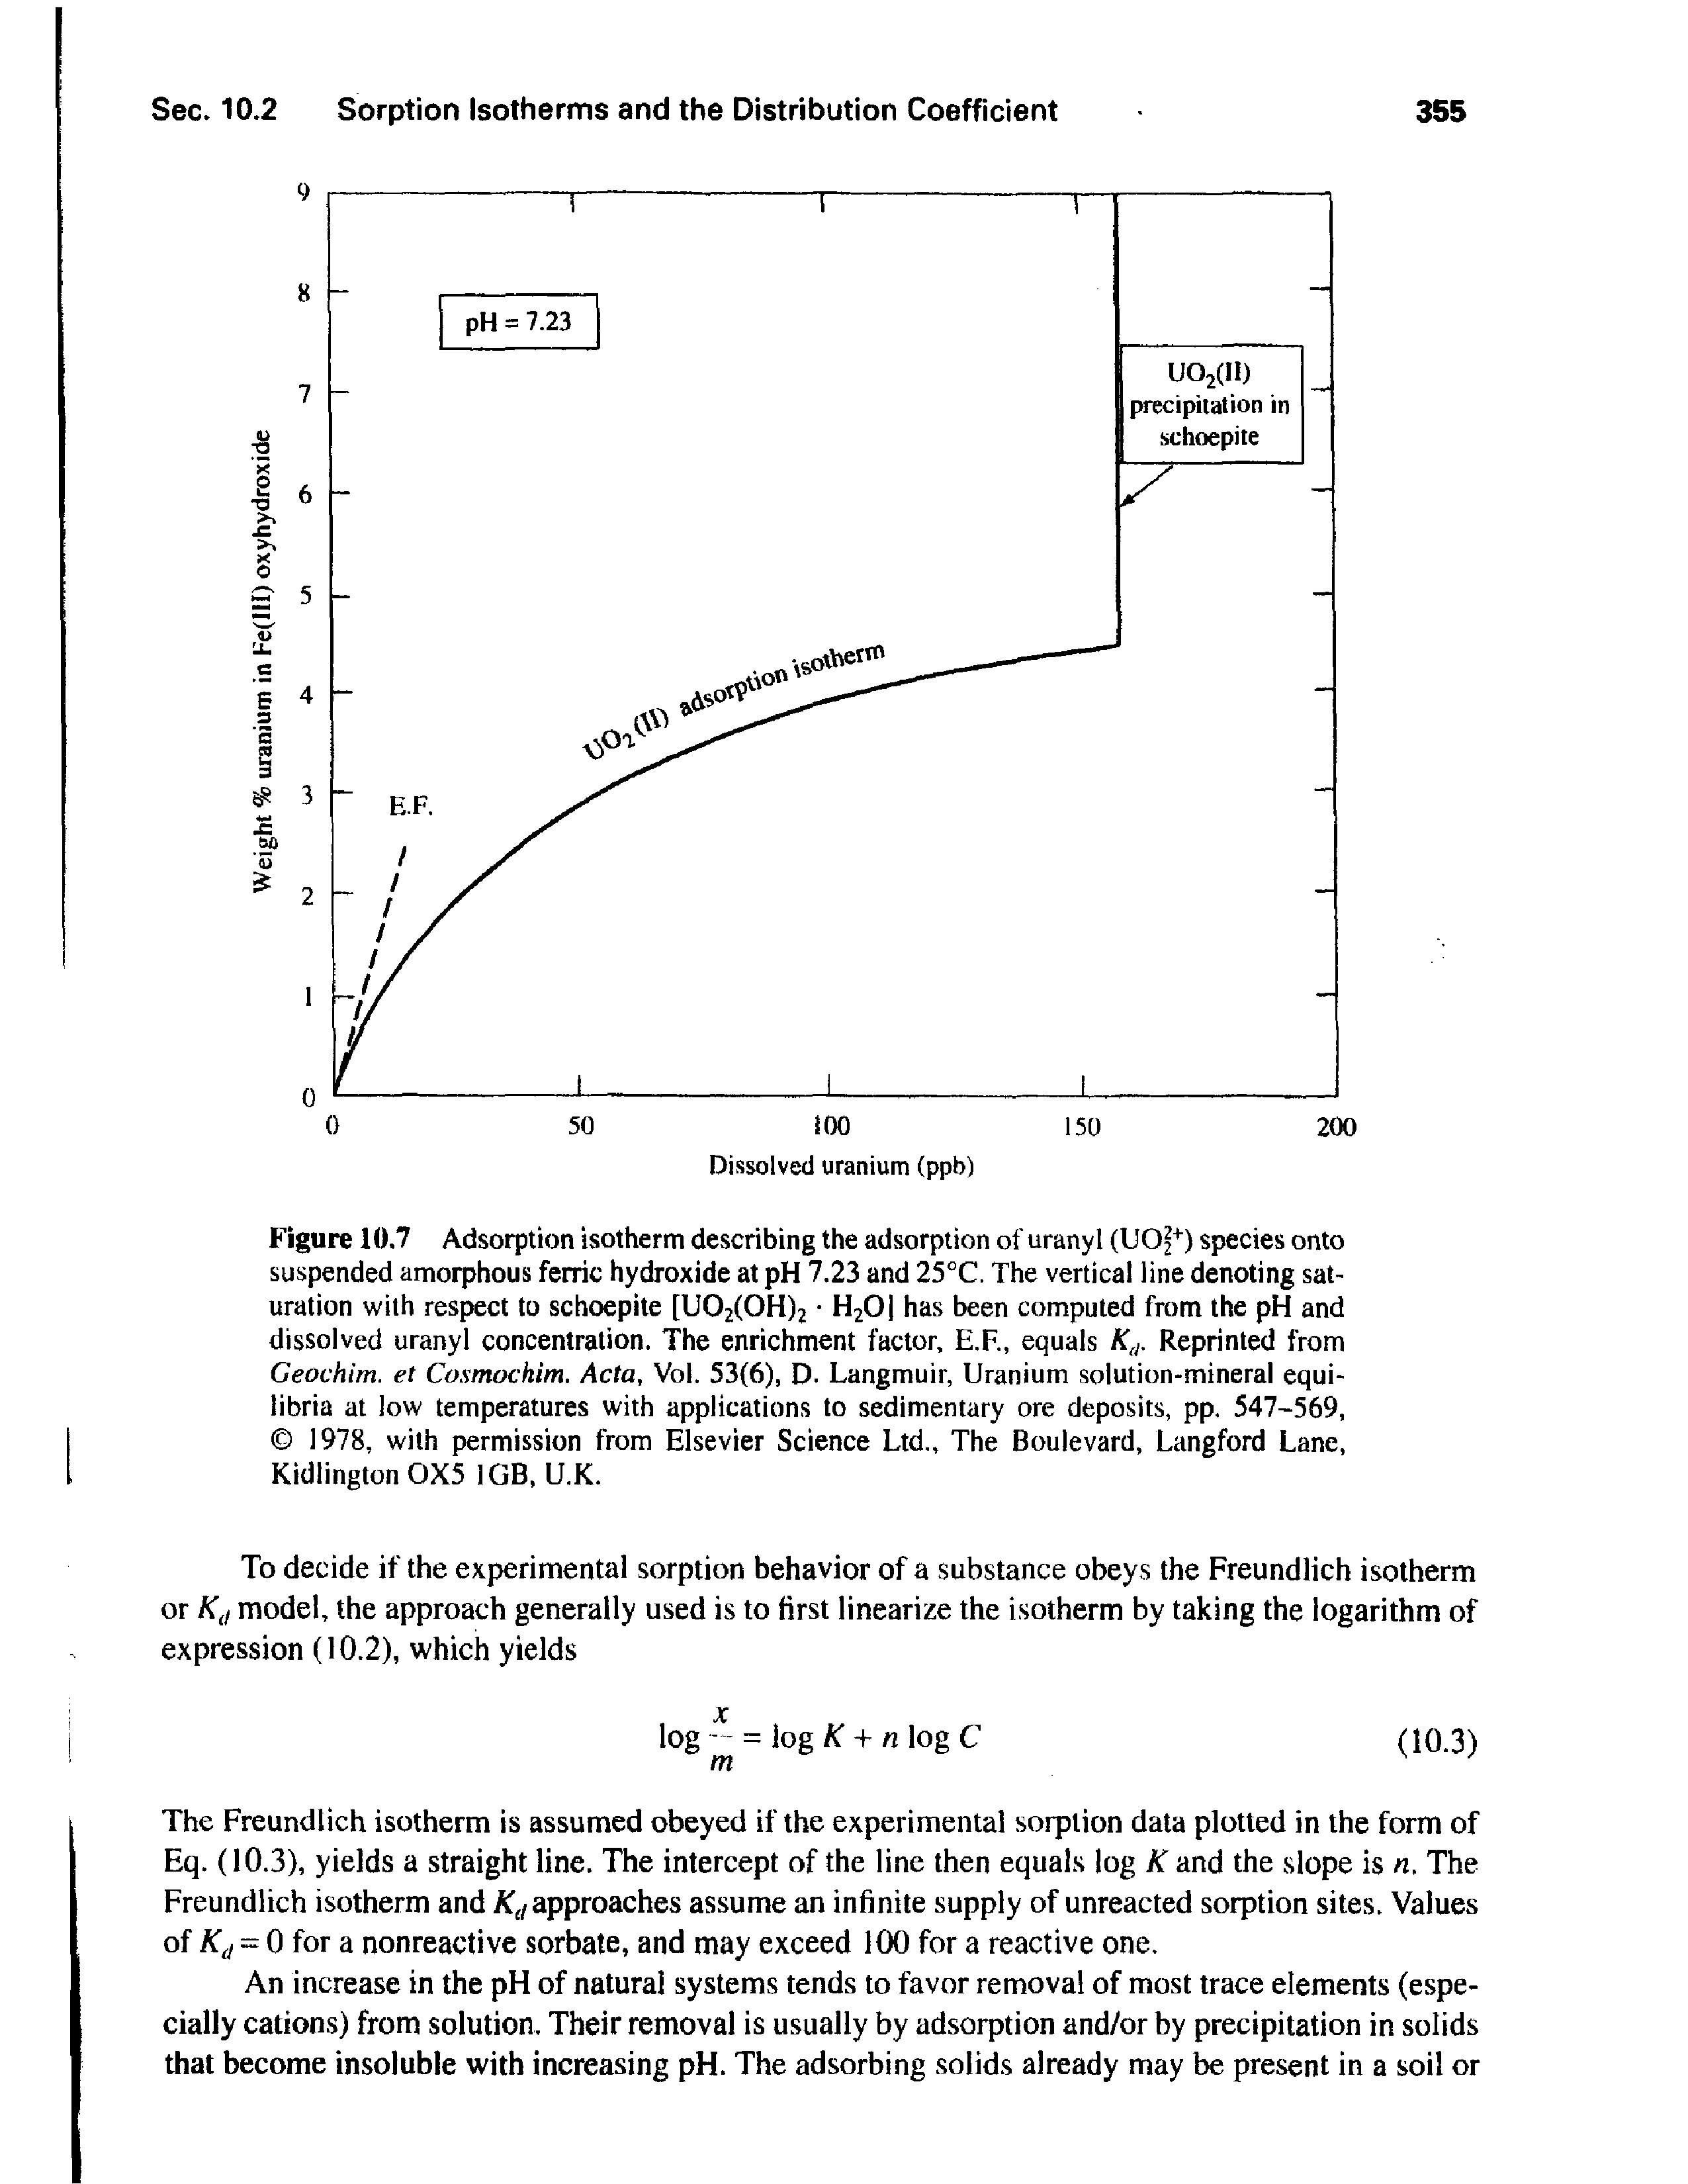 Figure 10.7 Adsorption isotherm describing the adsorption of uranyl (UO +) species onto suspended amorphous ferric hydroxide at pH 7.23 and 25°C. The vertical line denoting saturation with respect to schoepite [U02(0H)2 H2OI has been computed from the pH and dissolved uranyl concentration. The enrichment factor, E.F., equals K,. Reprinted from Geochim. et Cosmochim. Acta, Vol. 53(6), D. Langmuir, Uranium solution-mineral equilibria at low temperatures with applications to sedimentary ore deposits, pp. 547-569,...